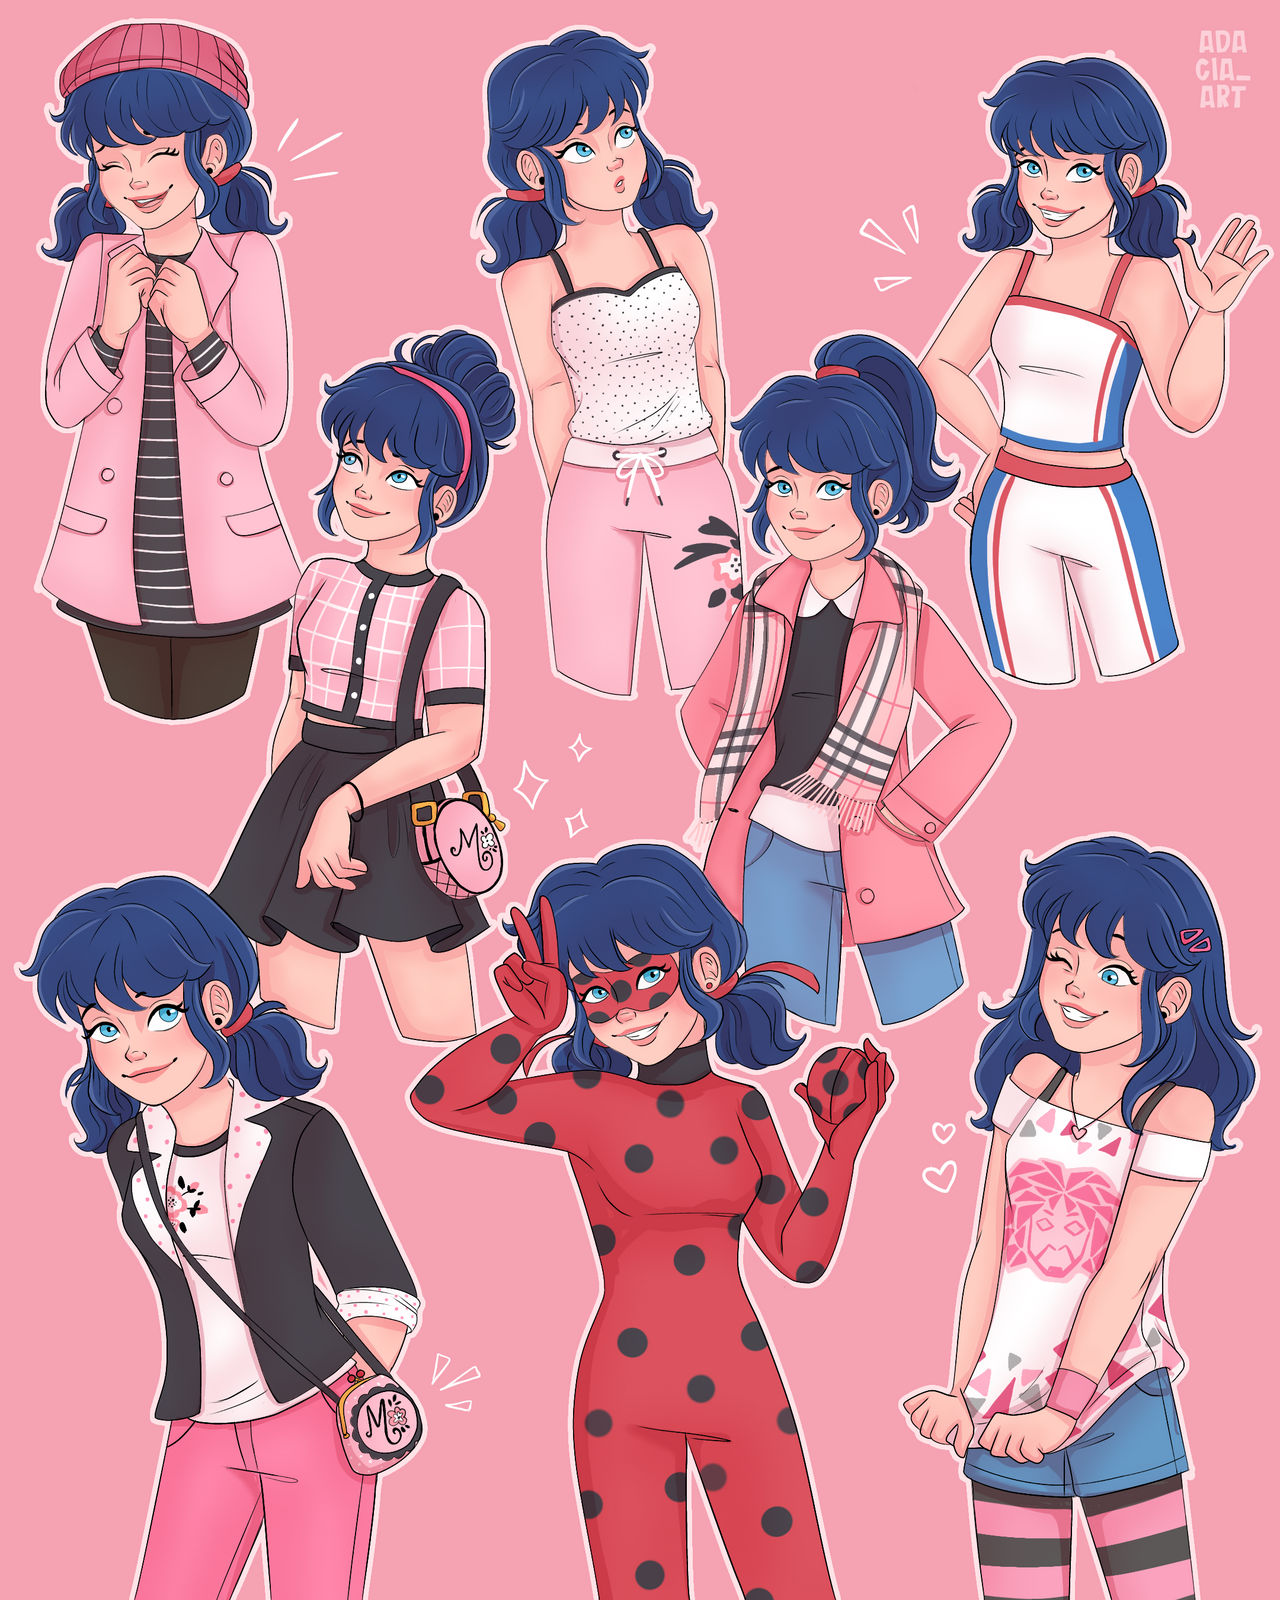 Miraculous Wardrobe - Marinette by SonicPossible00 on DeviantArt